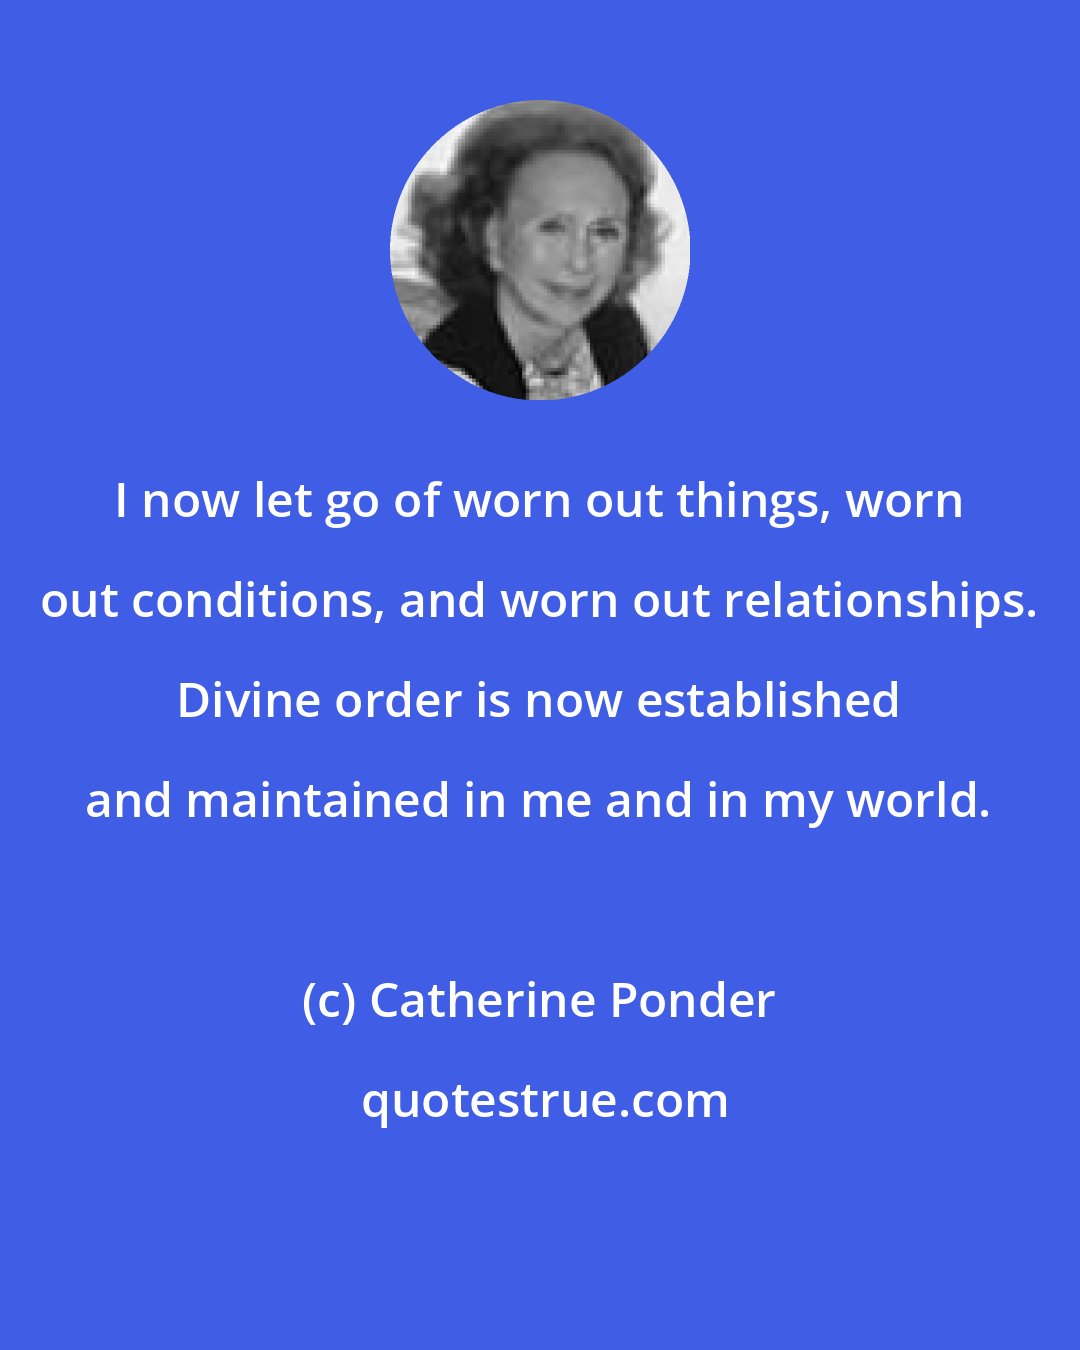 Catherine Ponder: I now let go of worn out things, worn out conditions, and worn out relationships. Divine order is now established and maintained in me and in my world.